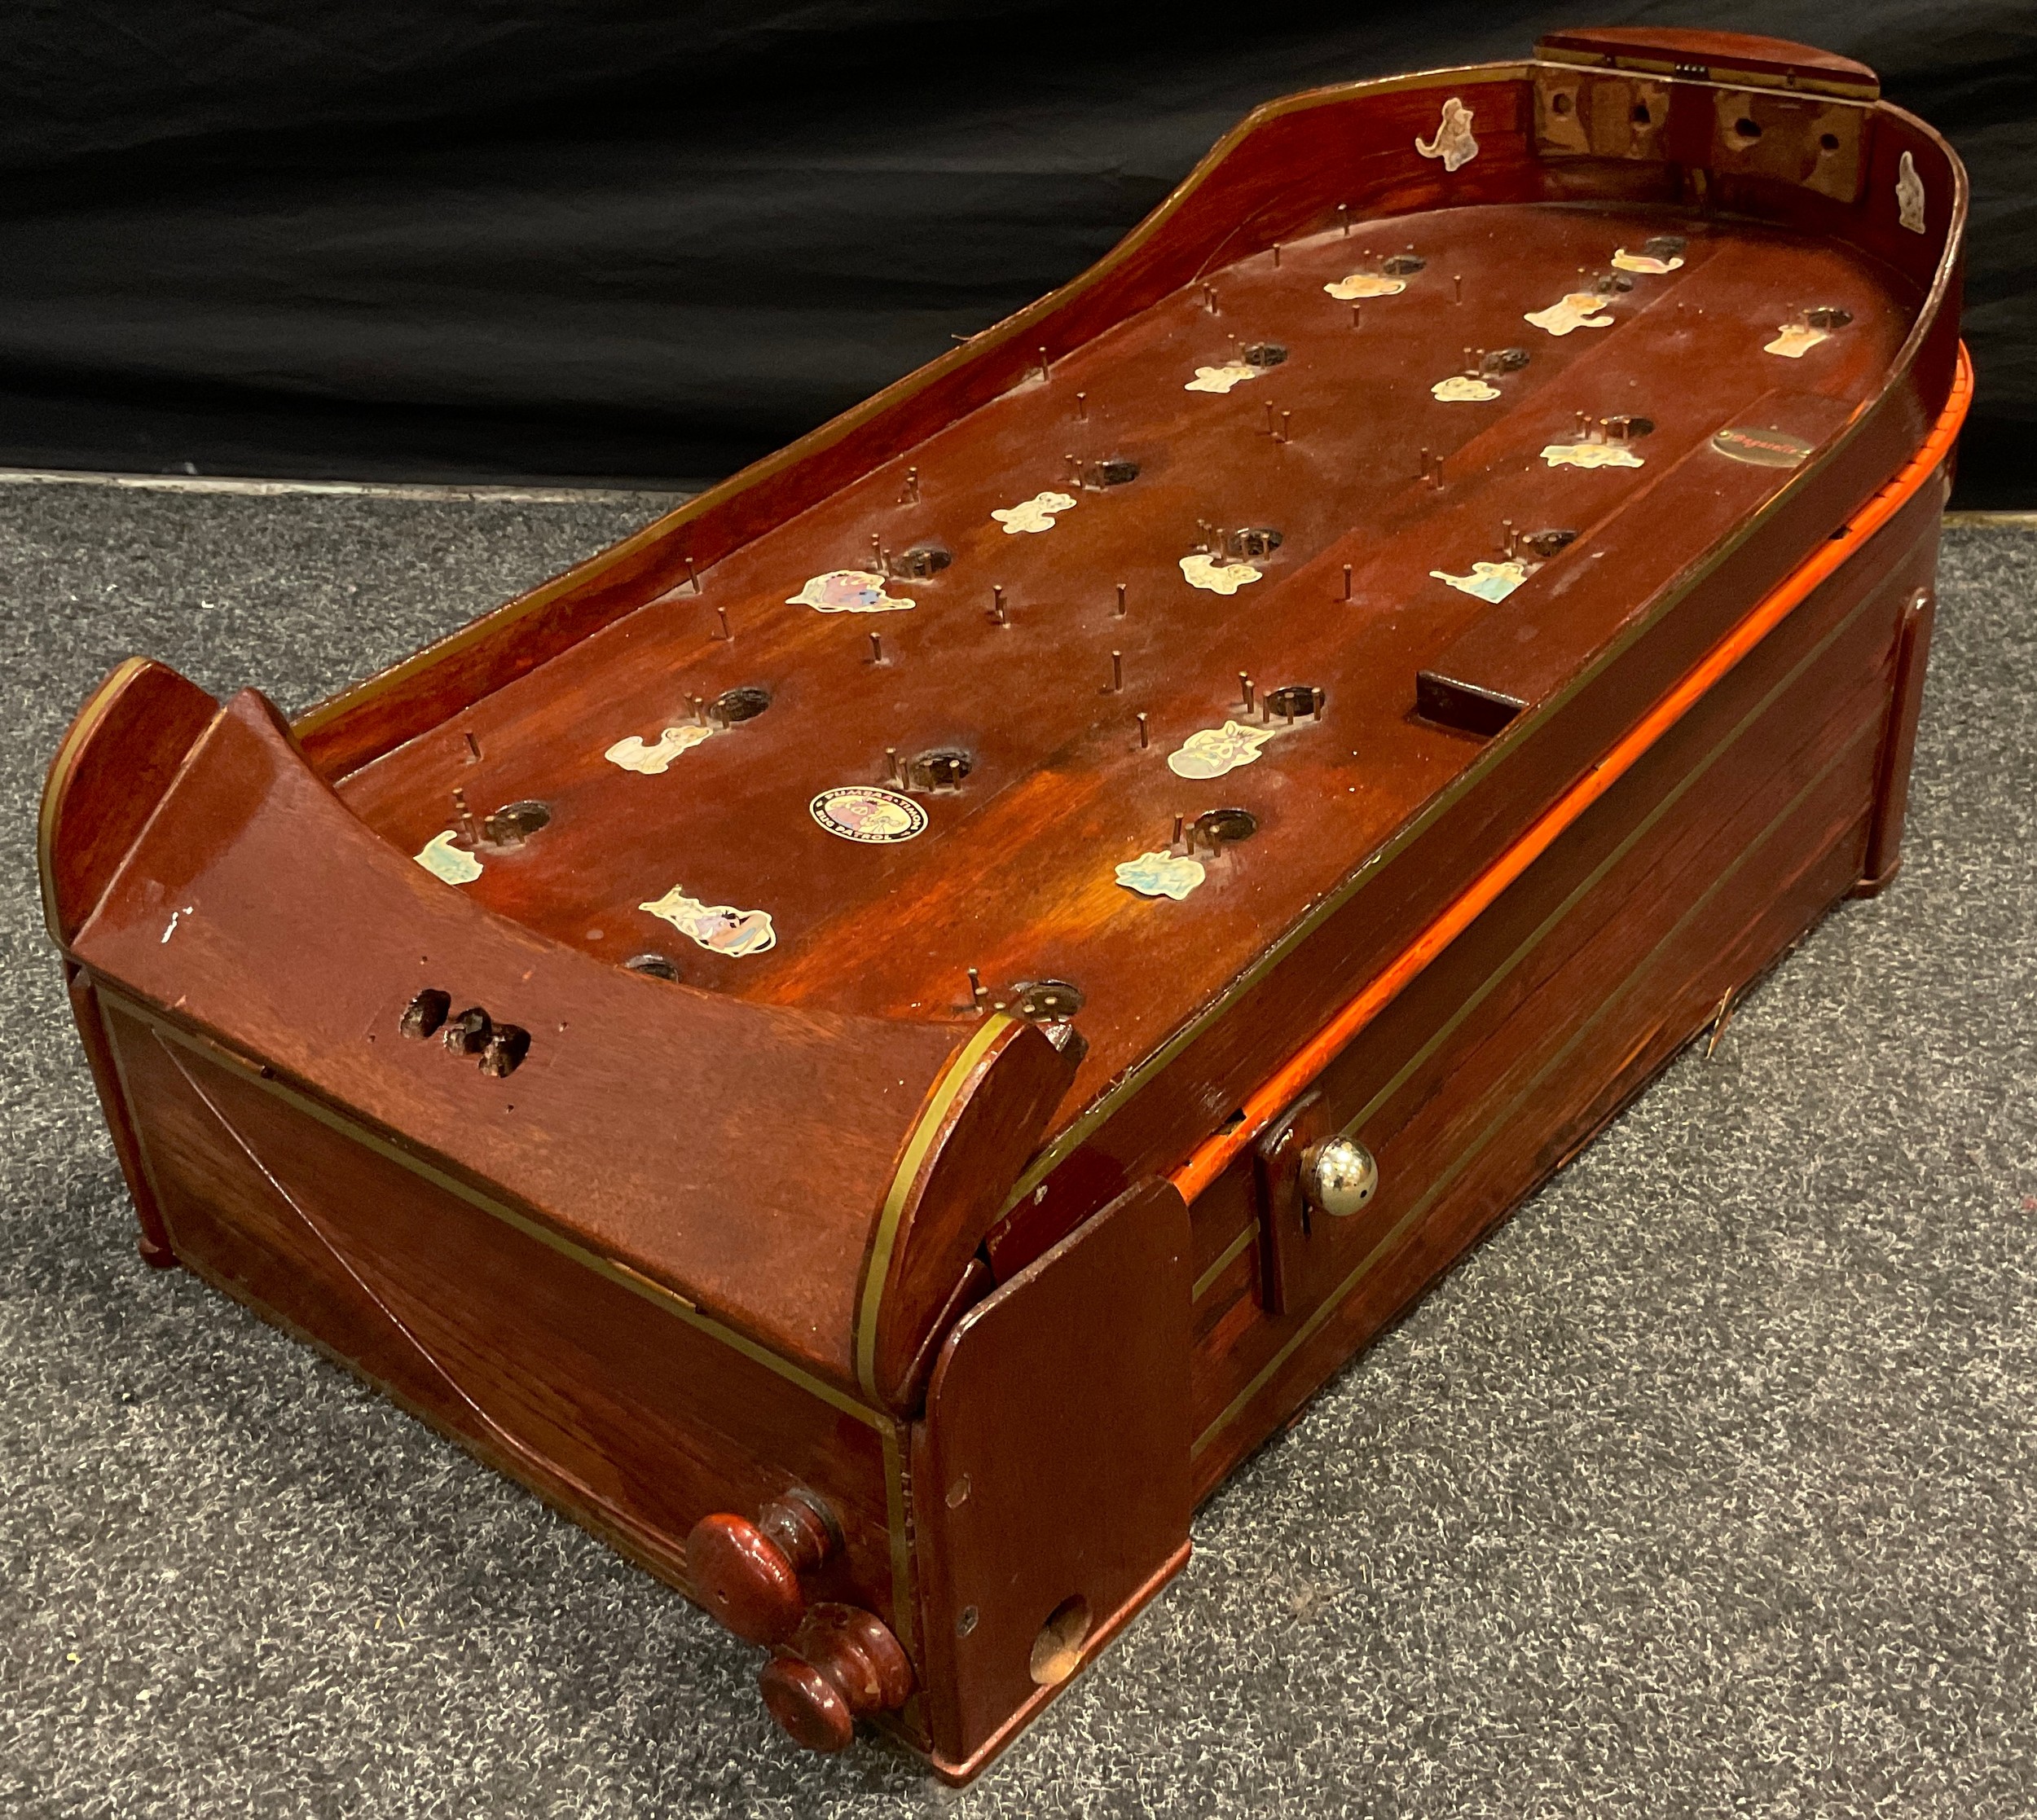 A table top Bagatelle board, 87cm x 40.5cm x 36cm high; snooker accessories - balls, table - Image 2 of 2